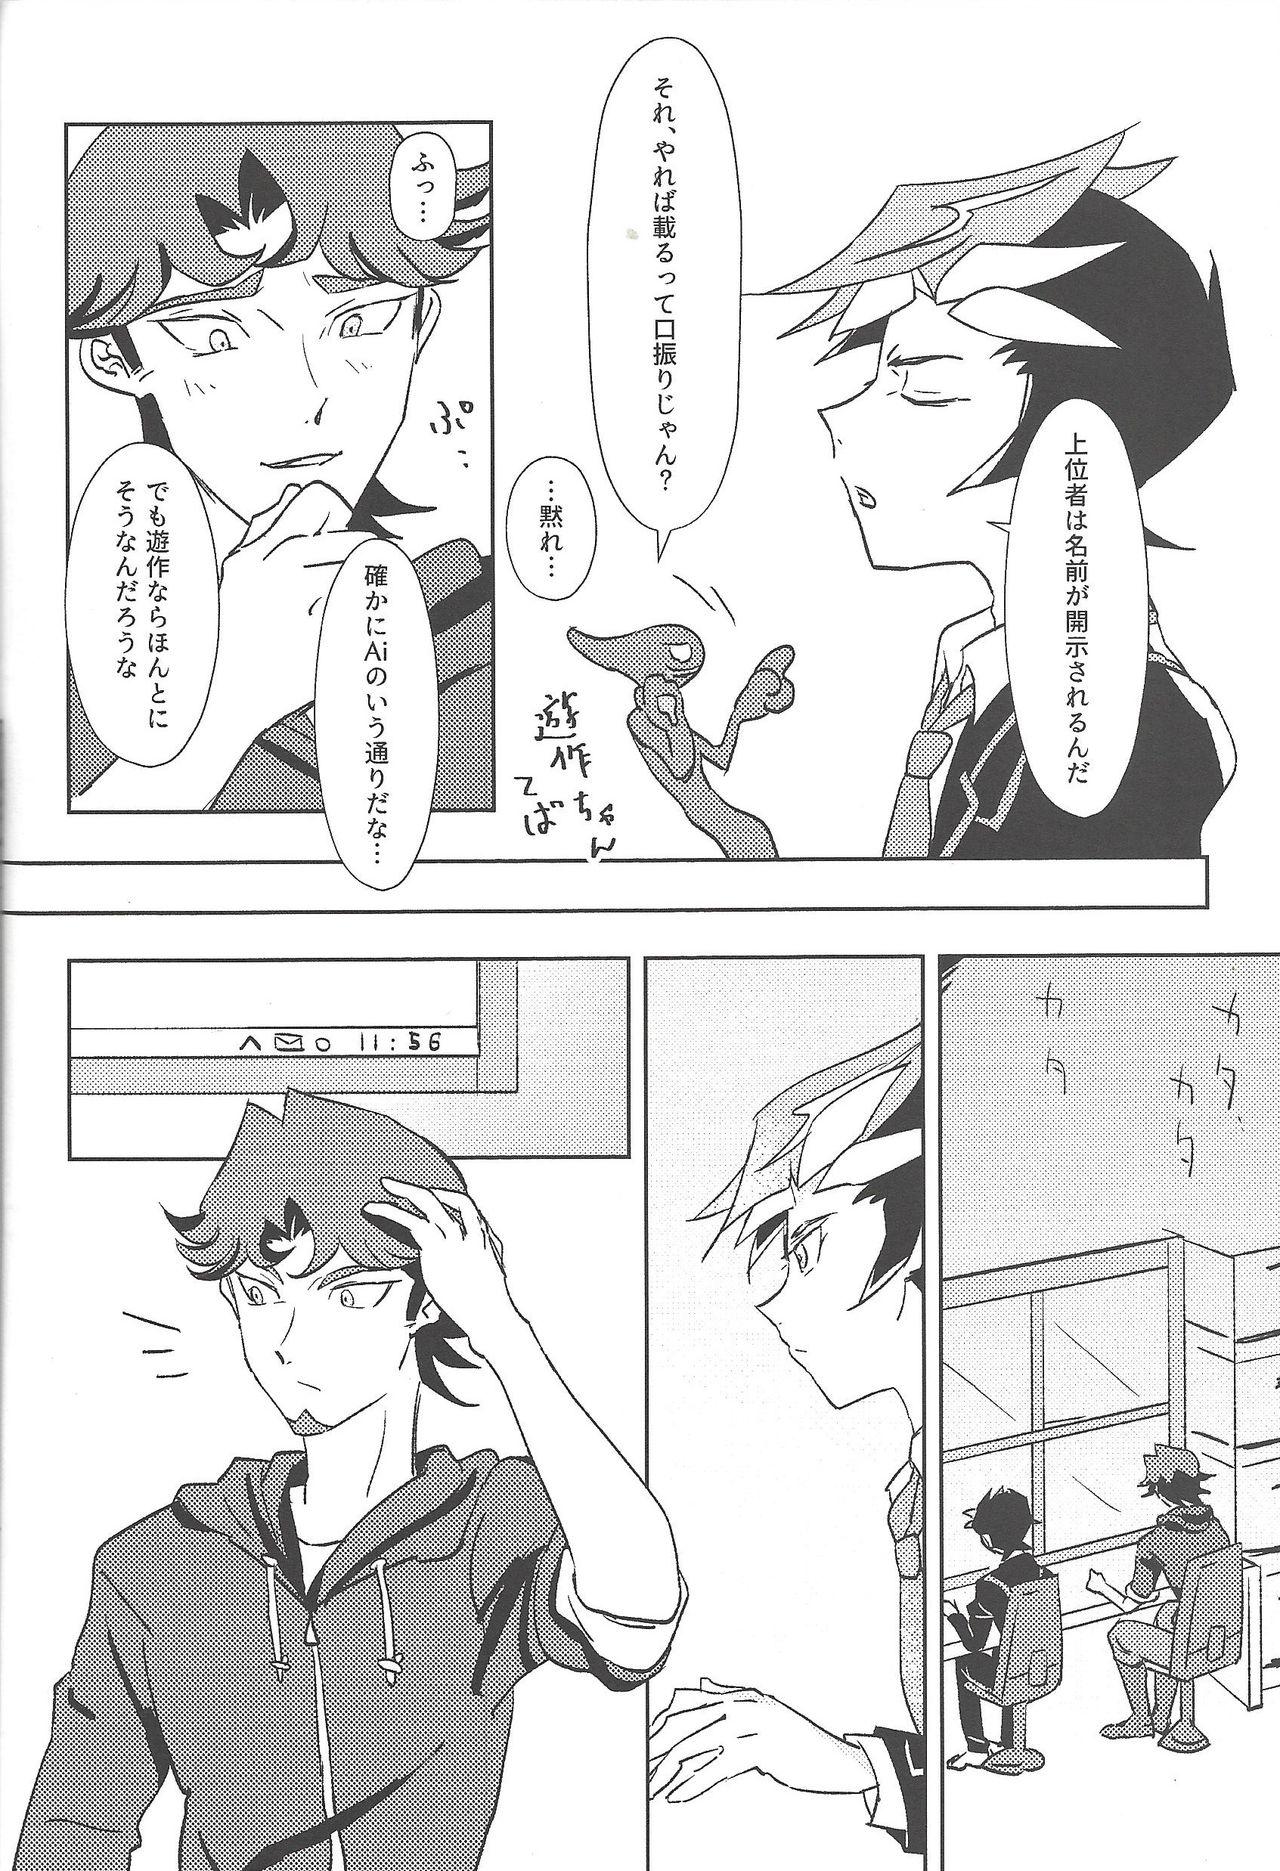 Amateurs Gone Out of School - Yu-gi-oh vrains Italiana - Page 7